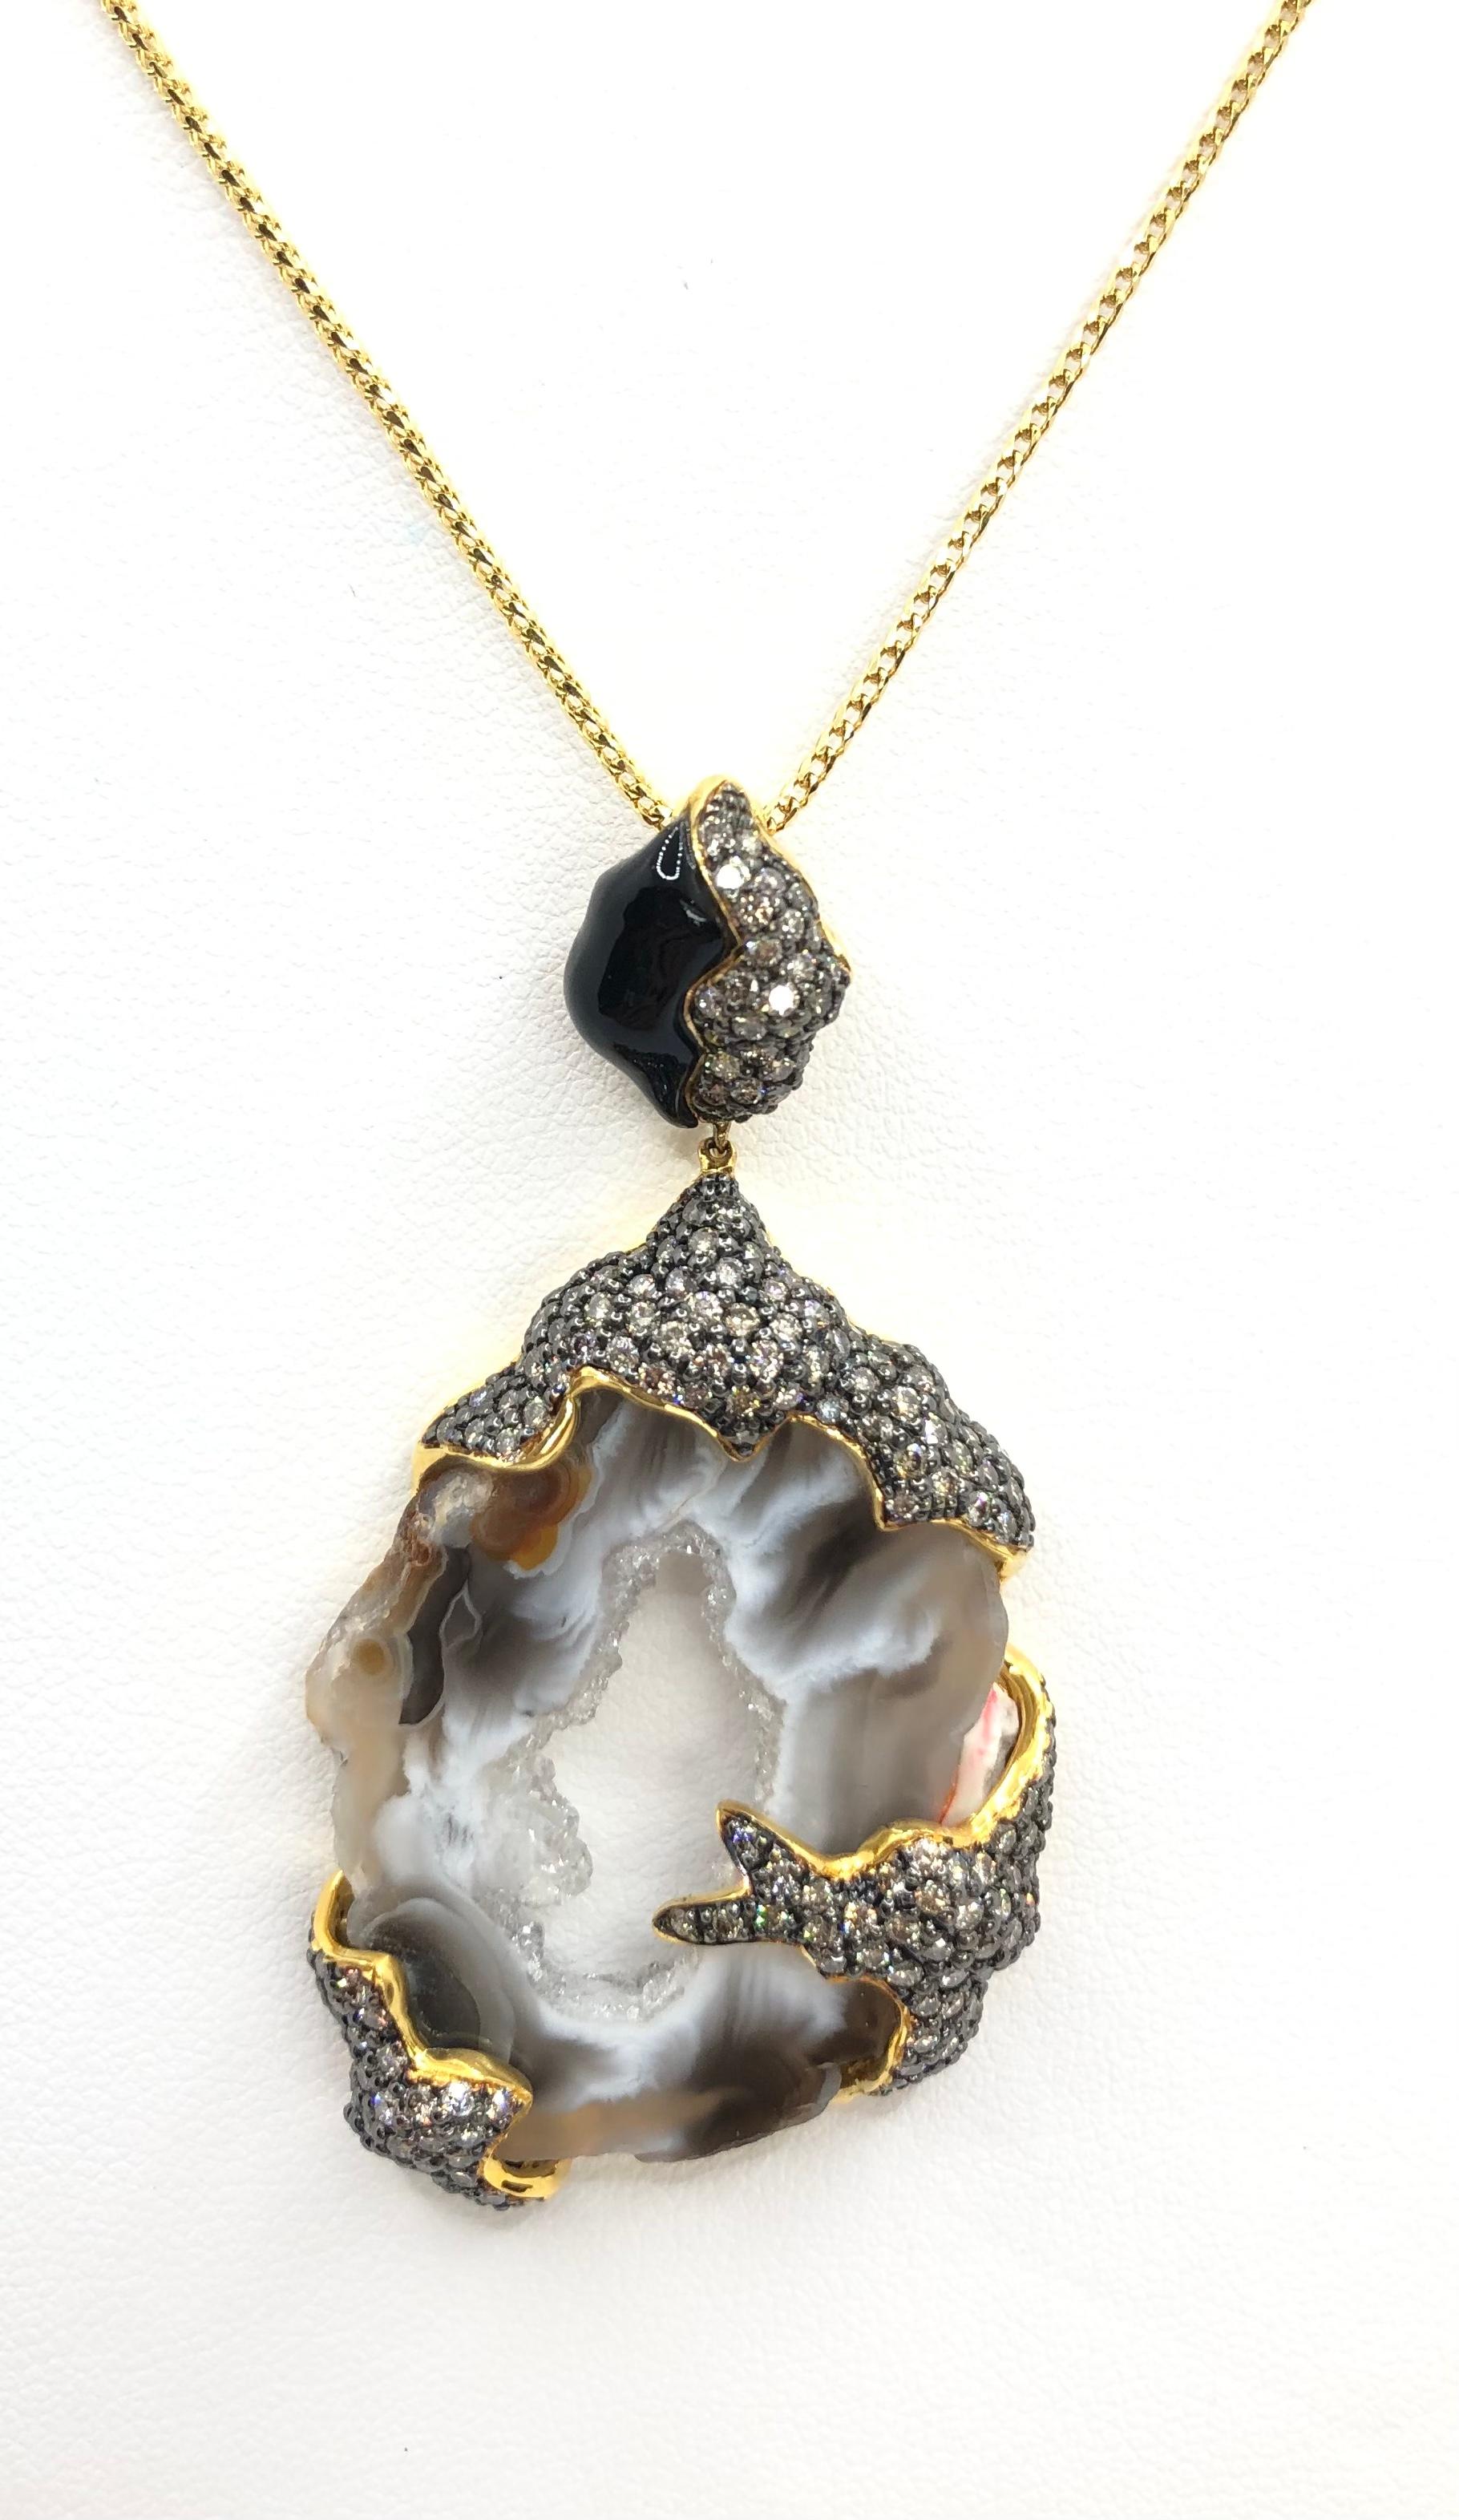 Quartz 26.83 carats with Onyx and Brown Diamond 2.34 carats Pendant set in 18 Karat Gold Settings
(chain not included)

Width: 3.0 cm 
Length: 6.0 cm
Total Weight: 16.73 grams

